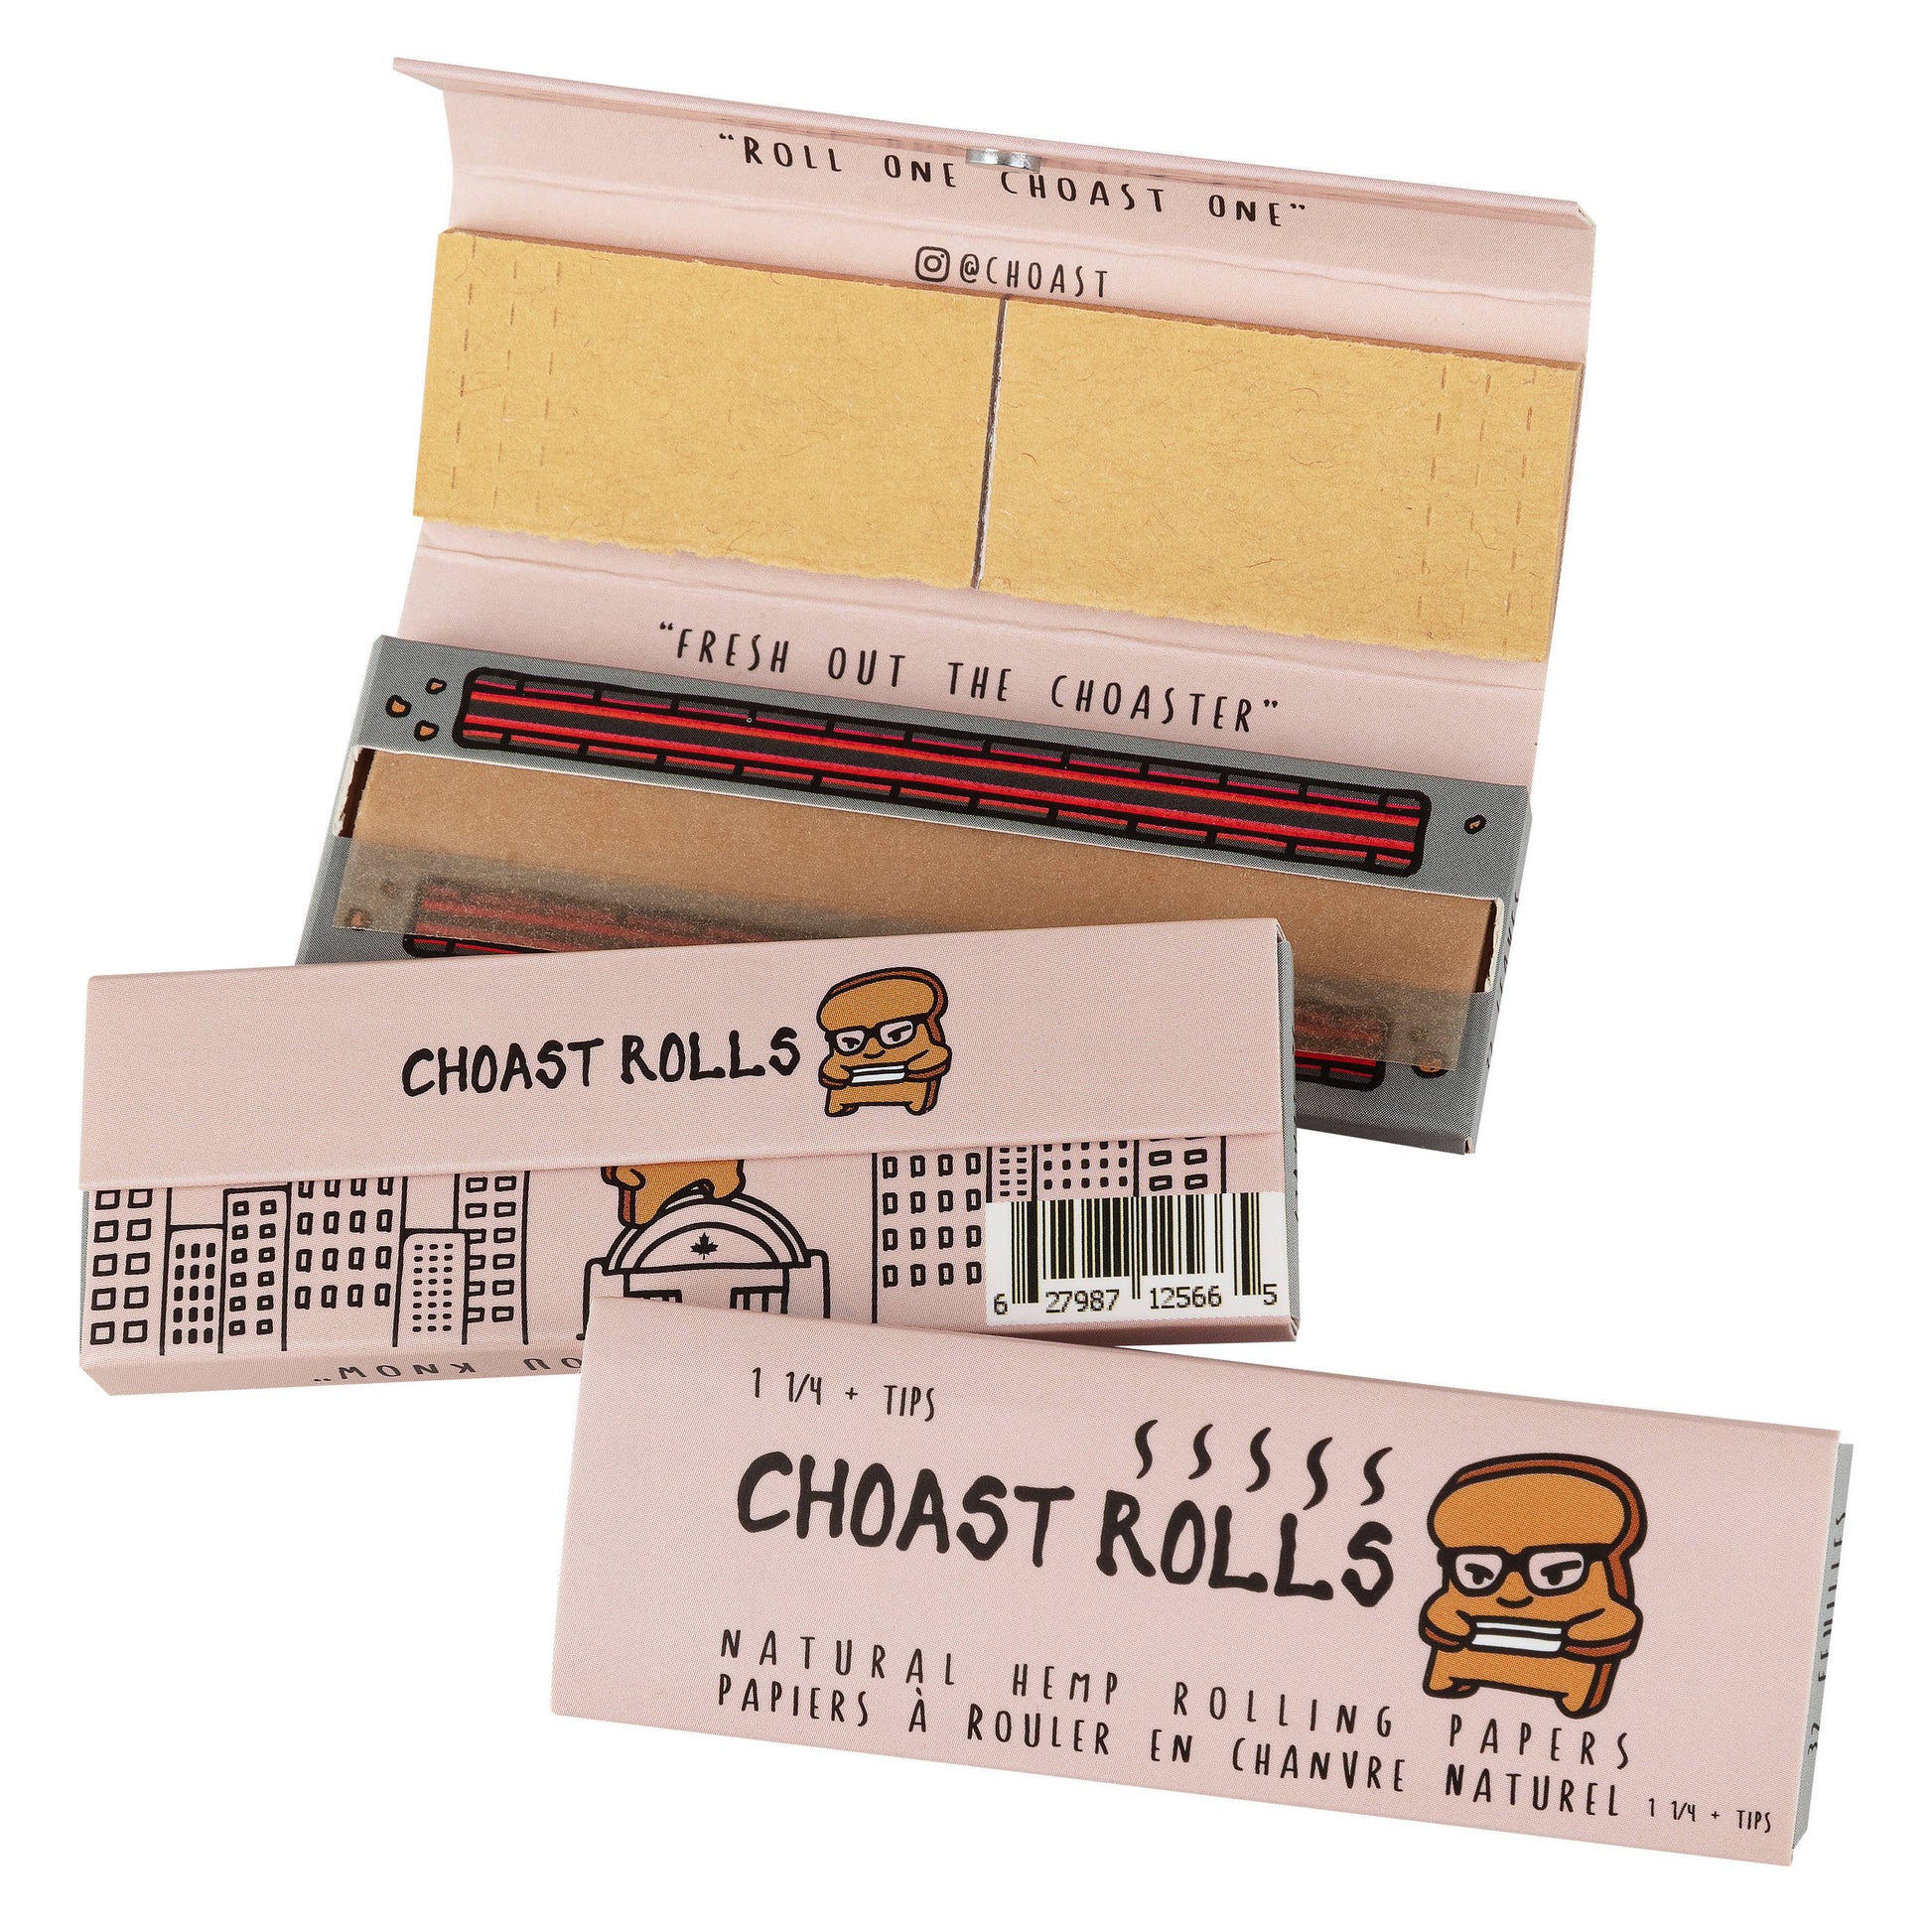 Choast Rolls, Quality Natural Rolling Papers - Carton of 22, Rolling Paper System - 1 1/4'' Papers with Filter Tips and Magnet Closing Lid_1